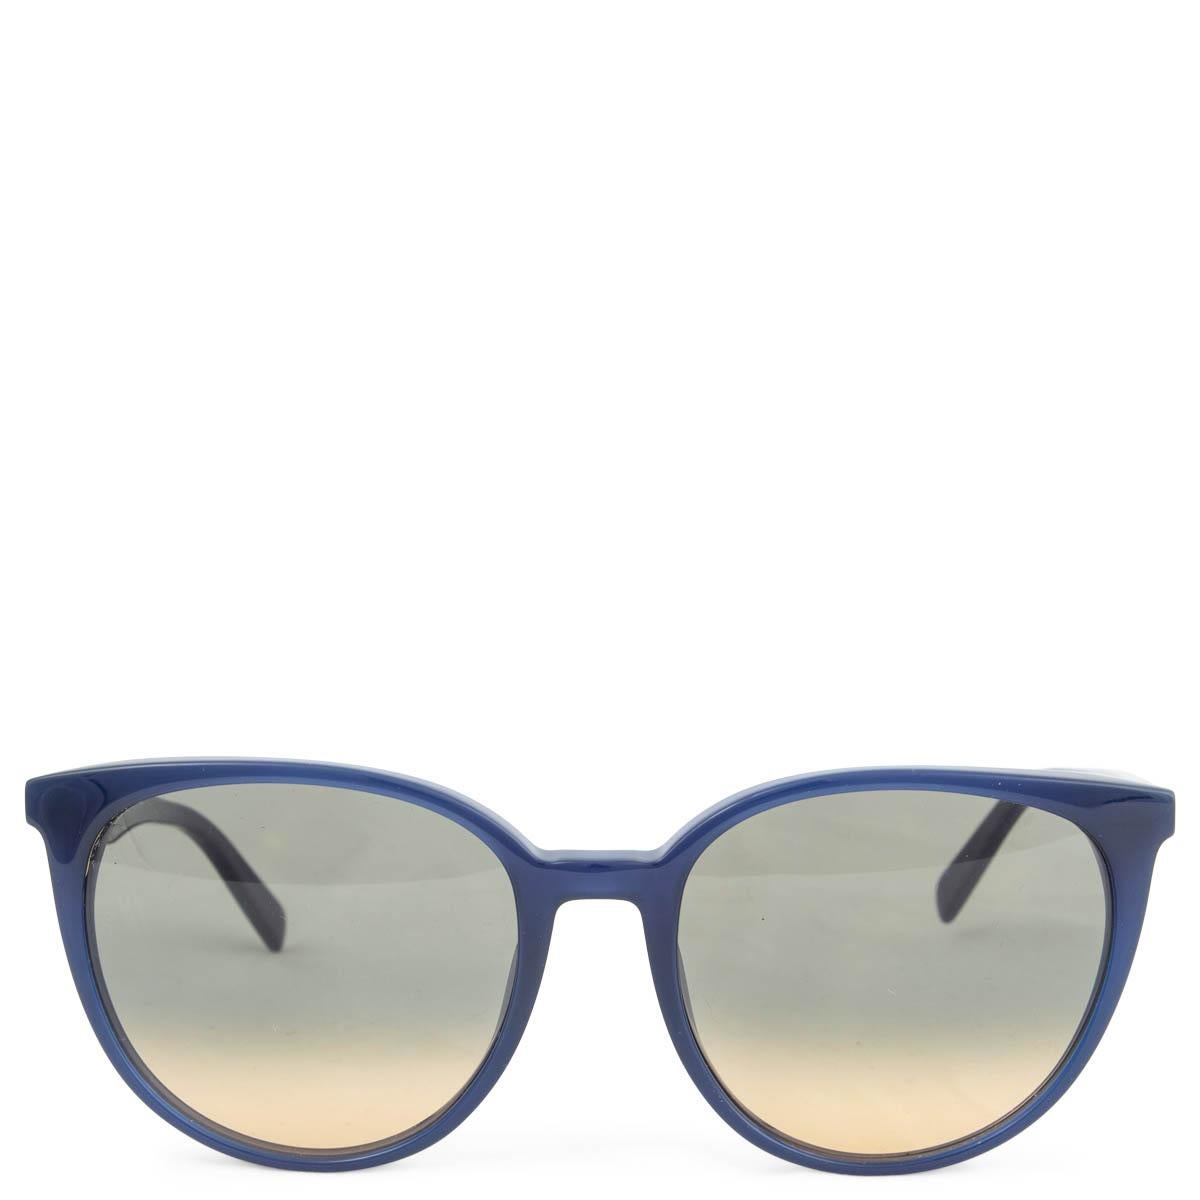 CELINE navy blue THIN MARY Sunglasses CL41068S For Sale